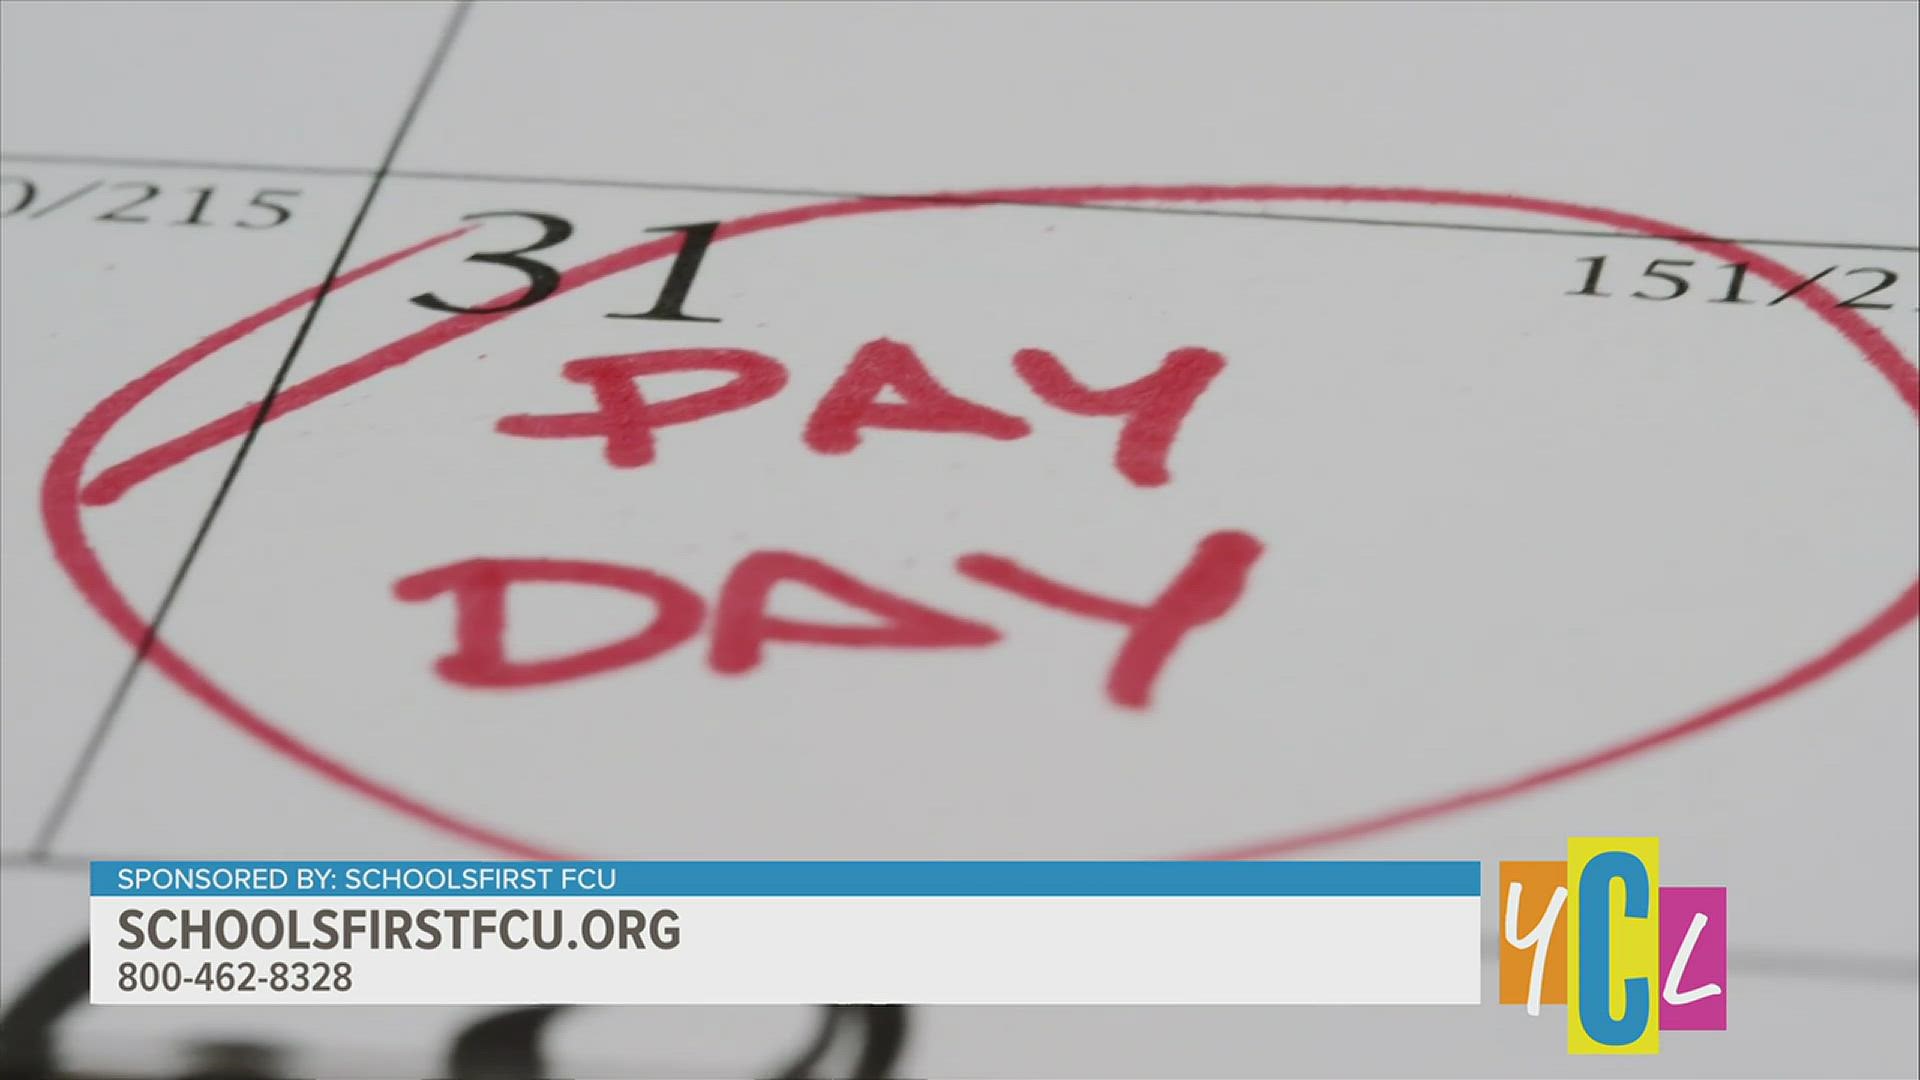 Many have an unhealthy relationship with their finances, but it doesn't have to be this way. This segment is paid by SchoolsFirst FCU.